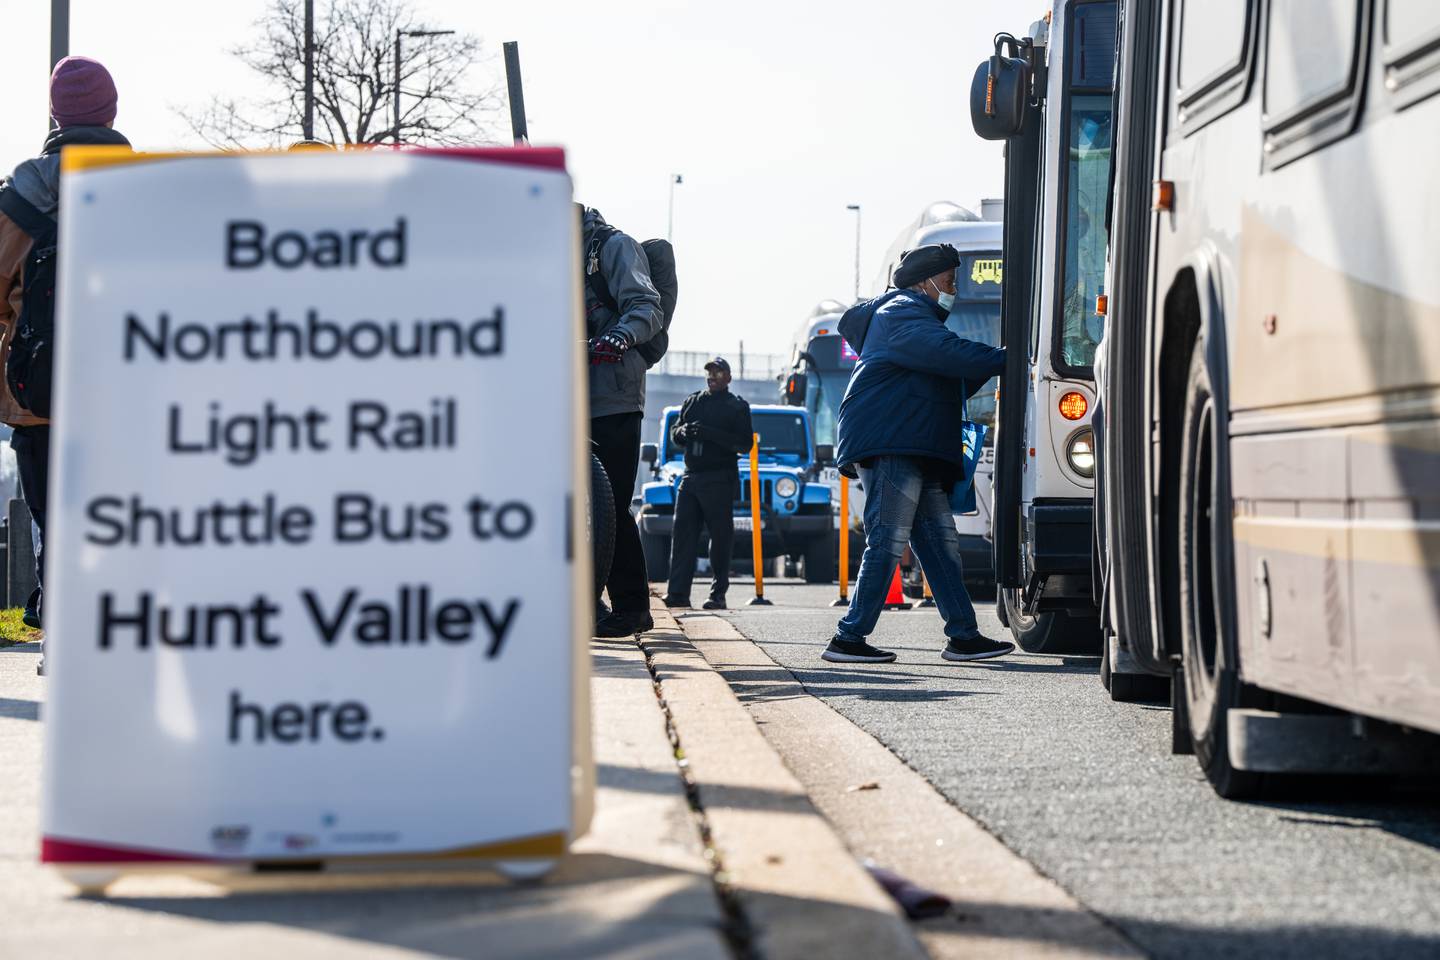 A rider boards a shuttle bus. A sign reading "Board Northbound Light Rail Shuttle Bus to Hunt Valley here" is in the left foreground.